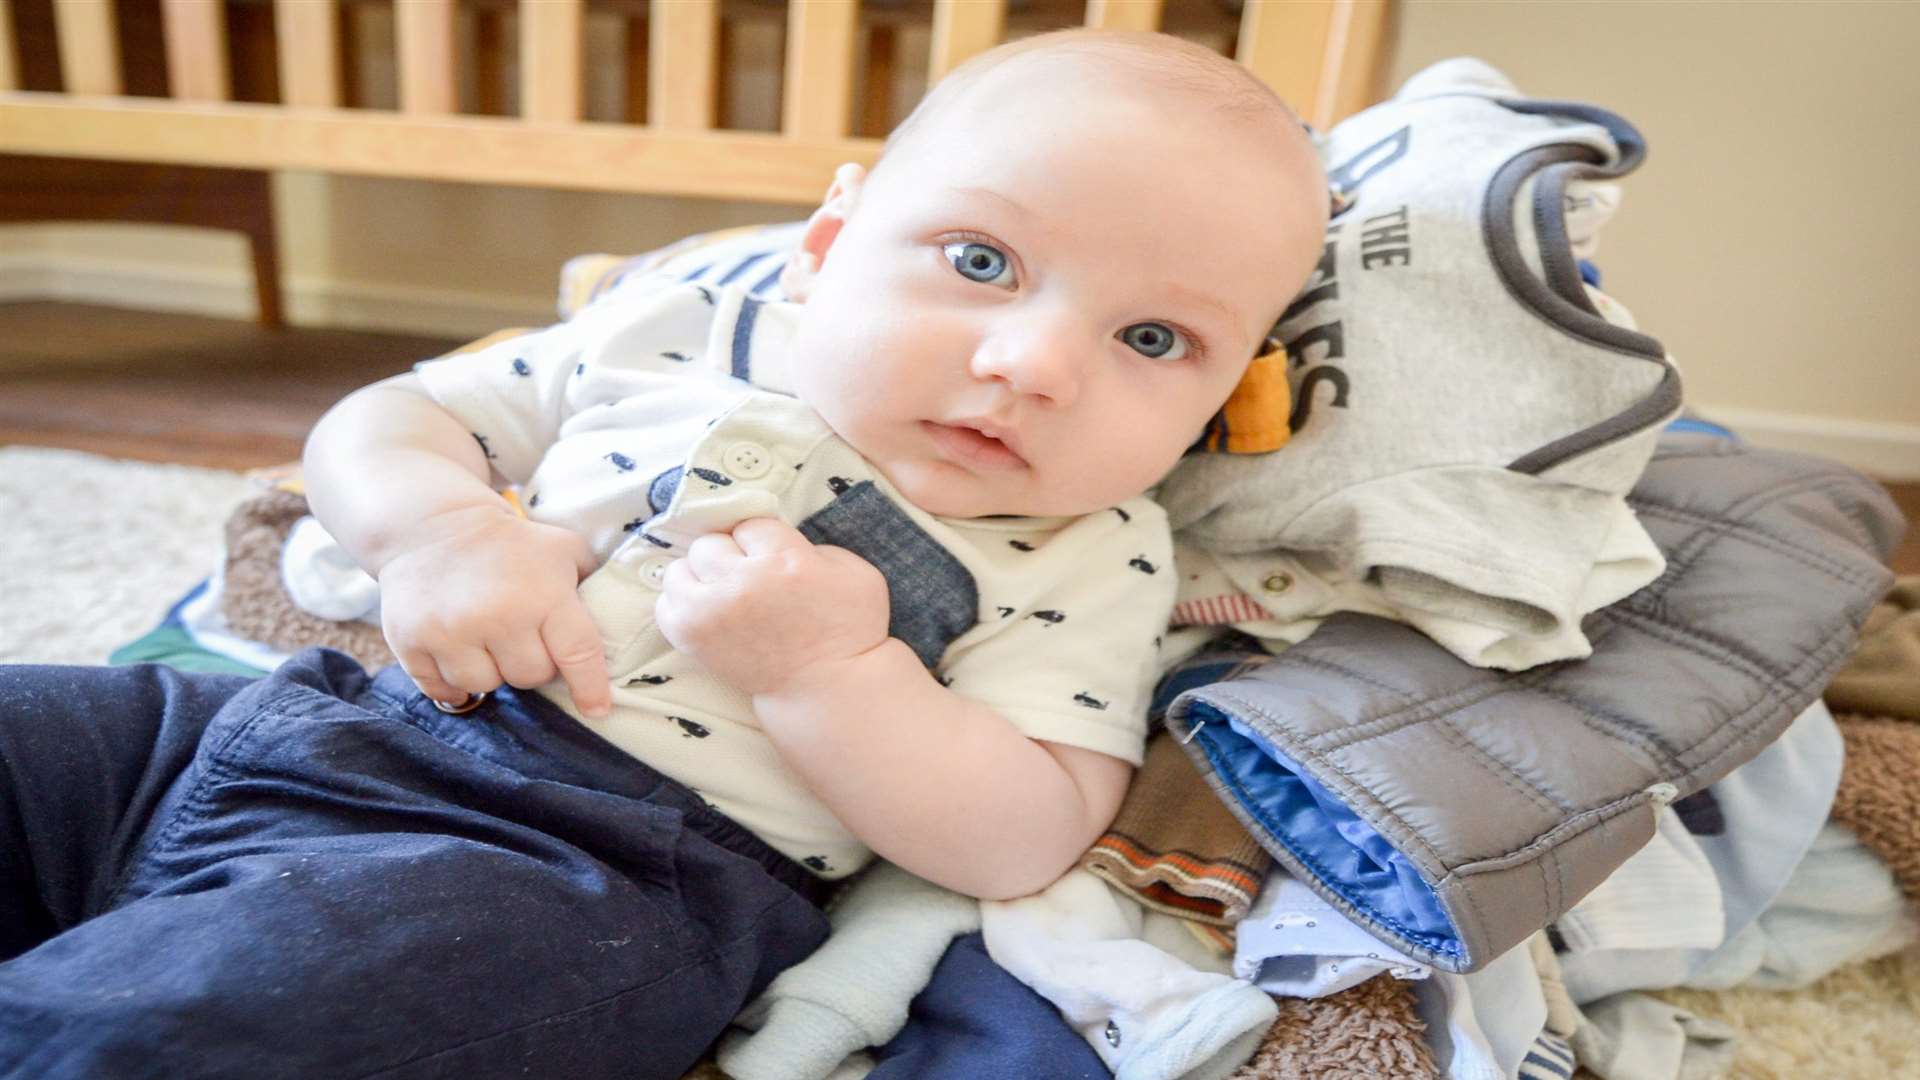 At just 10 weeks old, Jack was the size of a one-year-old. Picture: SWNS